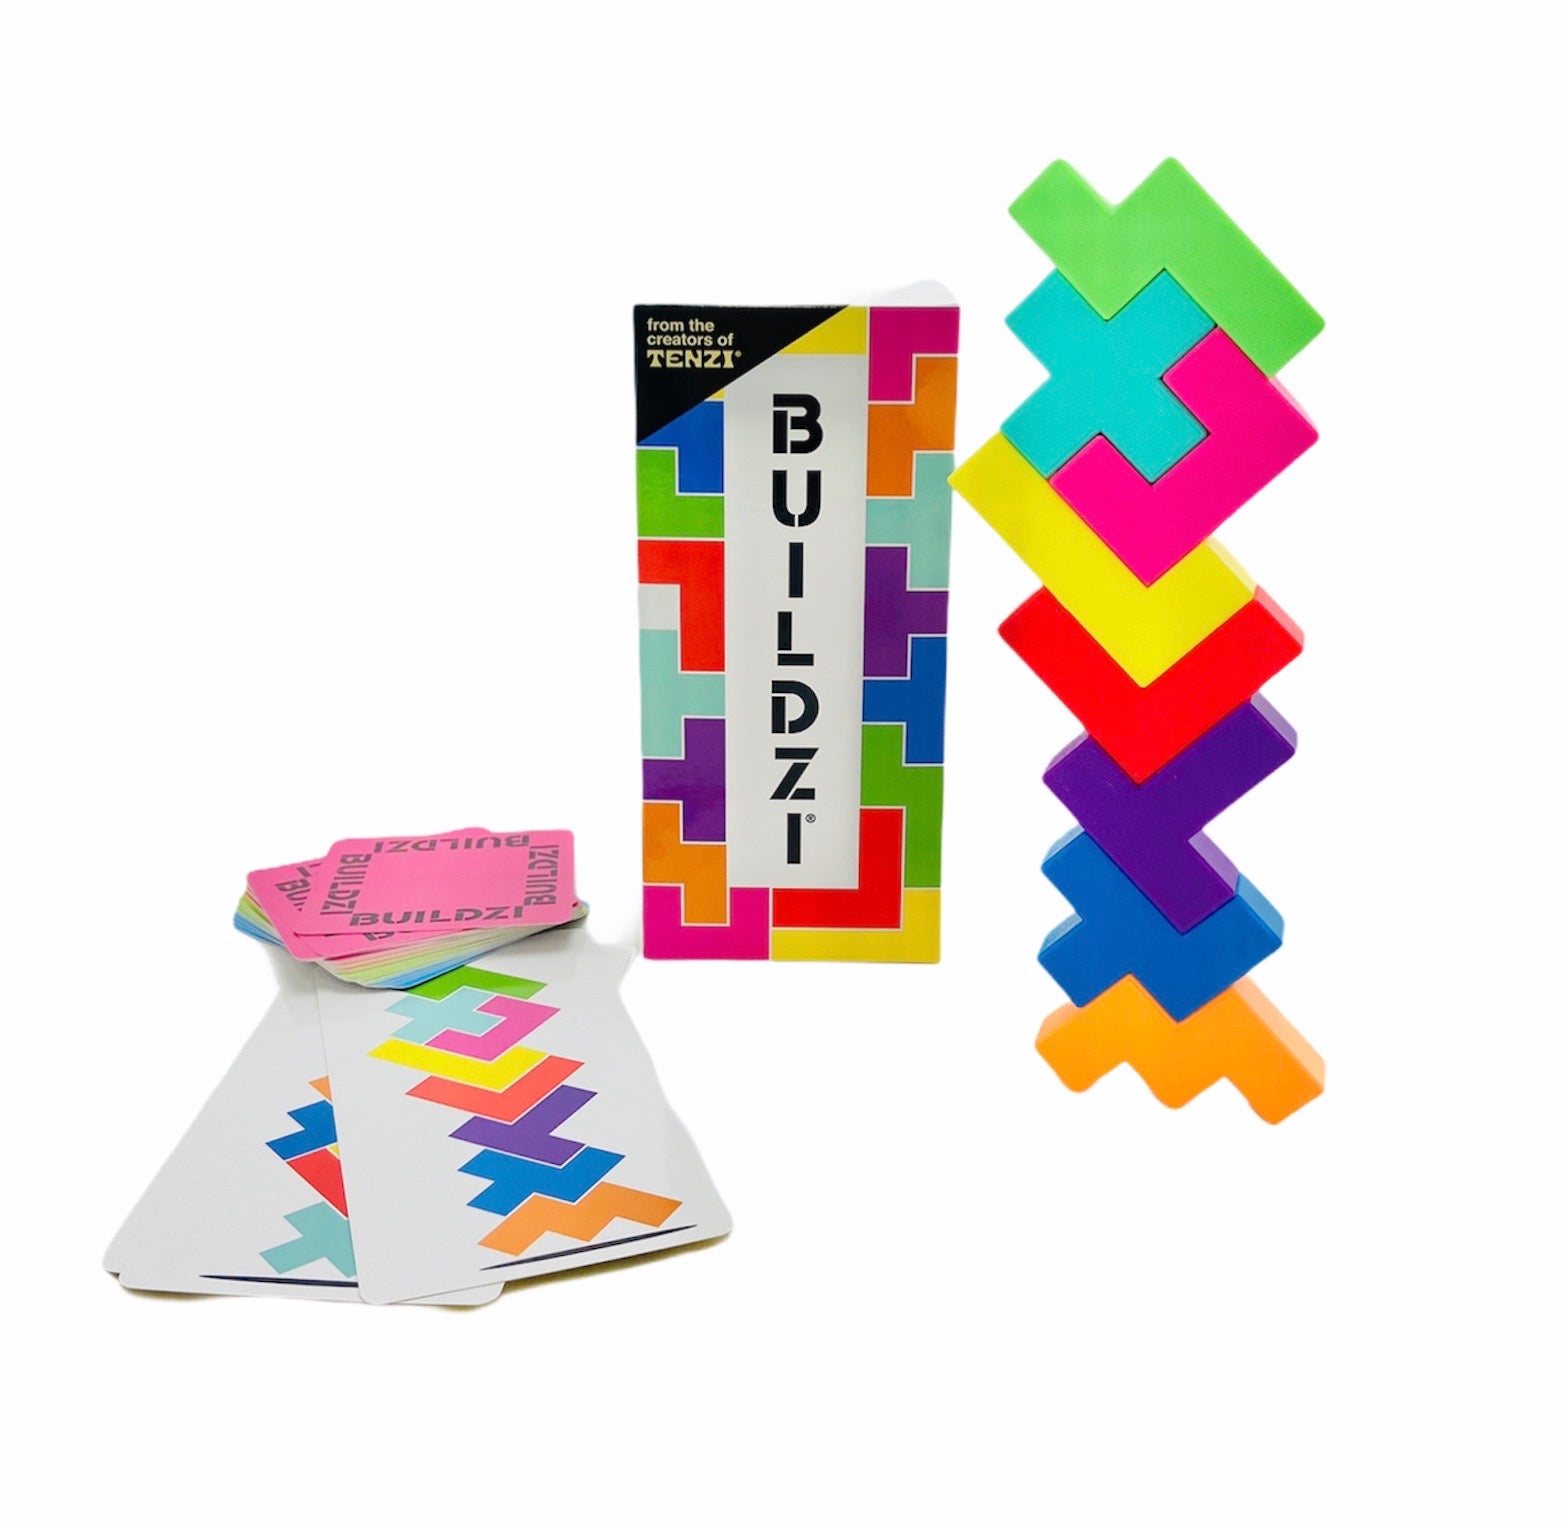 Buildzi game pieces and coloured blocks laid out in front of packaging on white background